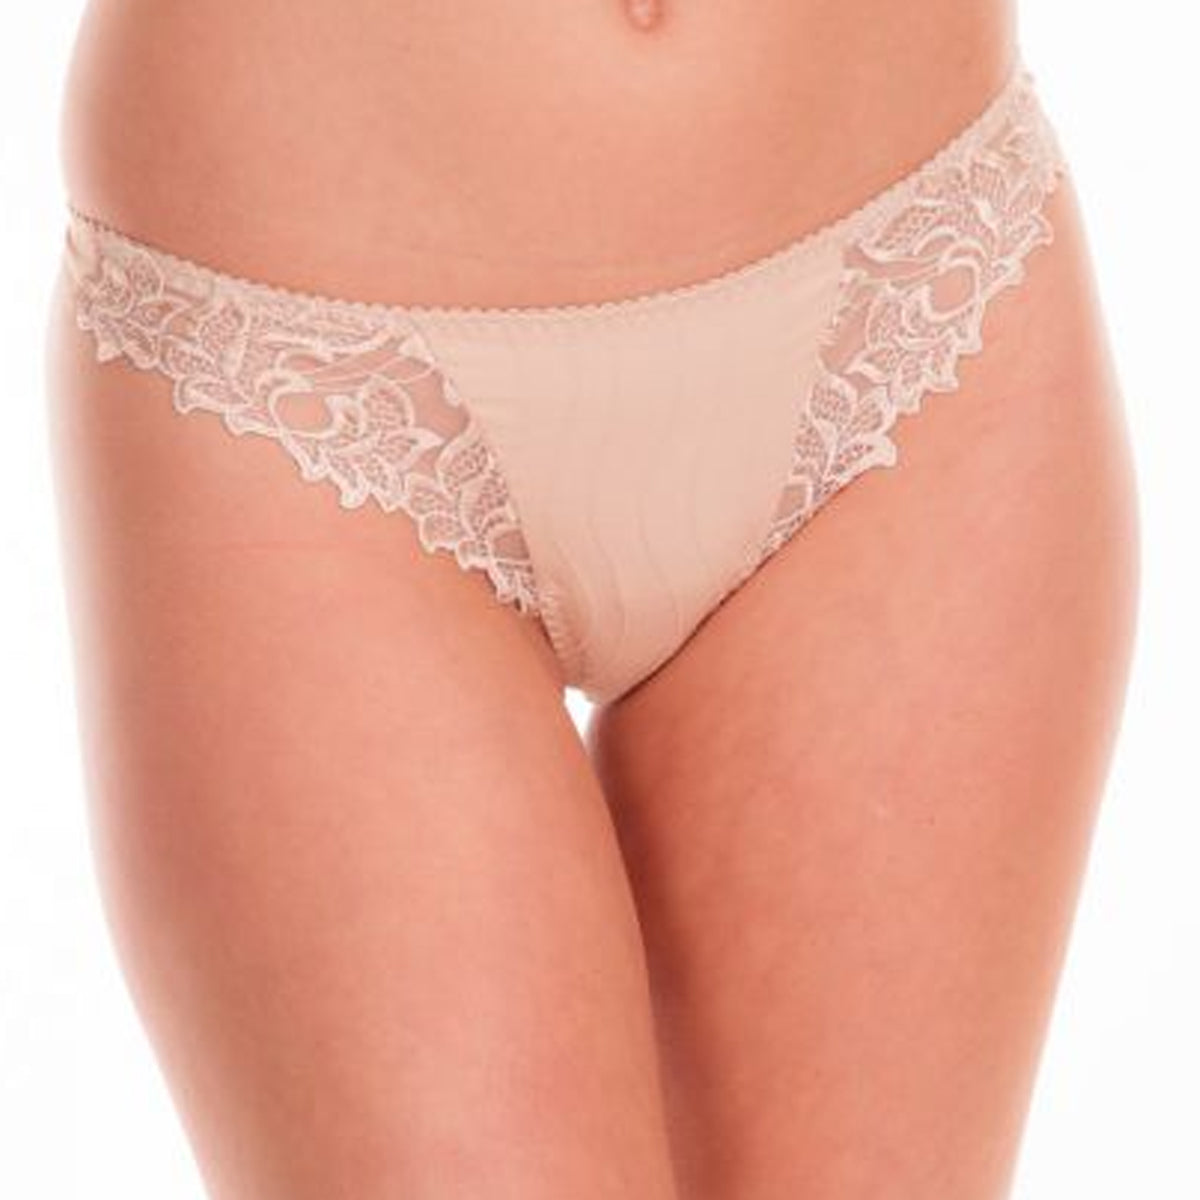 PrimaDonna Deauville Thong (DISCONTINUED)